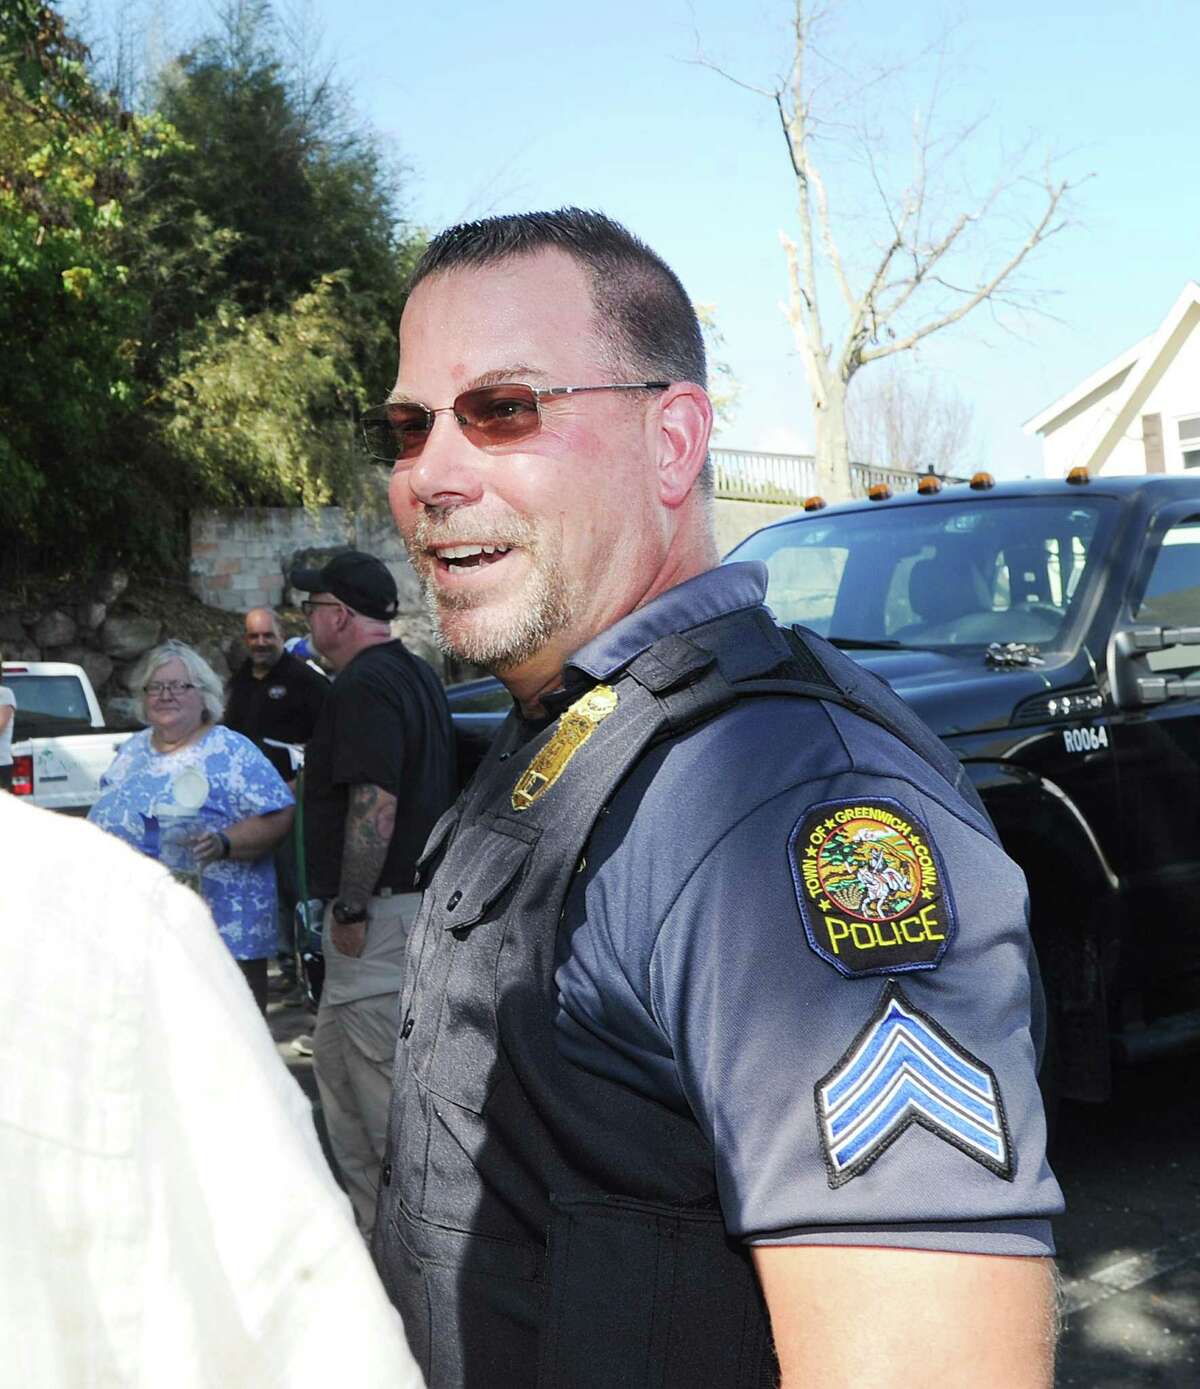 Greenwich Police Sgt. John Thorme smiles during the "Thank a Cop" law enforcement appreciation day event at Joey B's Chili Hub in the Cos Cob section of Greenwich, Conn., Wednesday, Sept. 27, 2017. Donations made by the public went to the college scholarship fund for the families of Greenwich law enforcement.